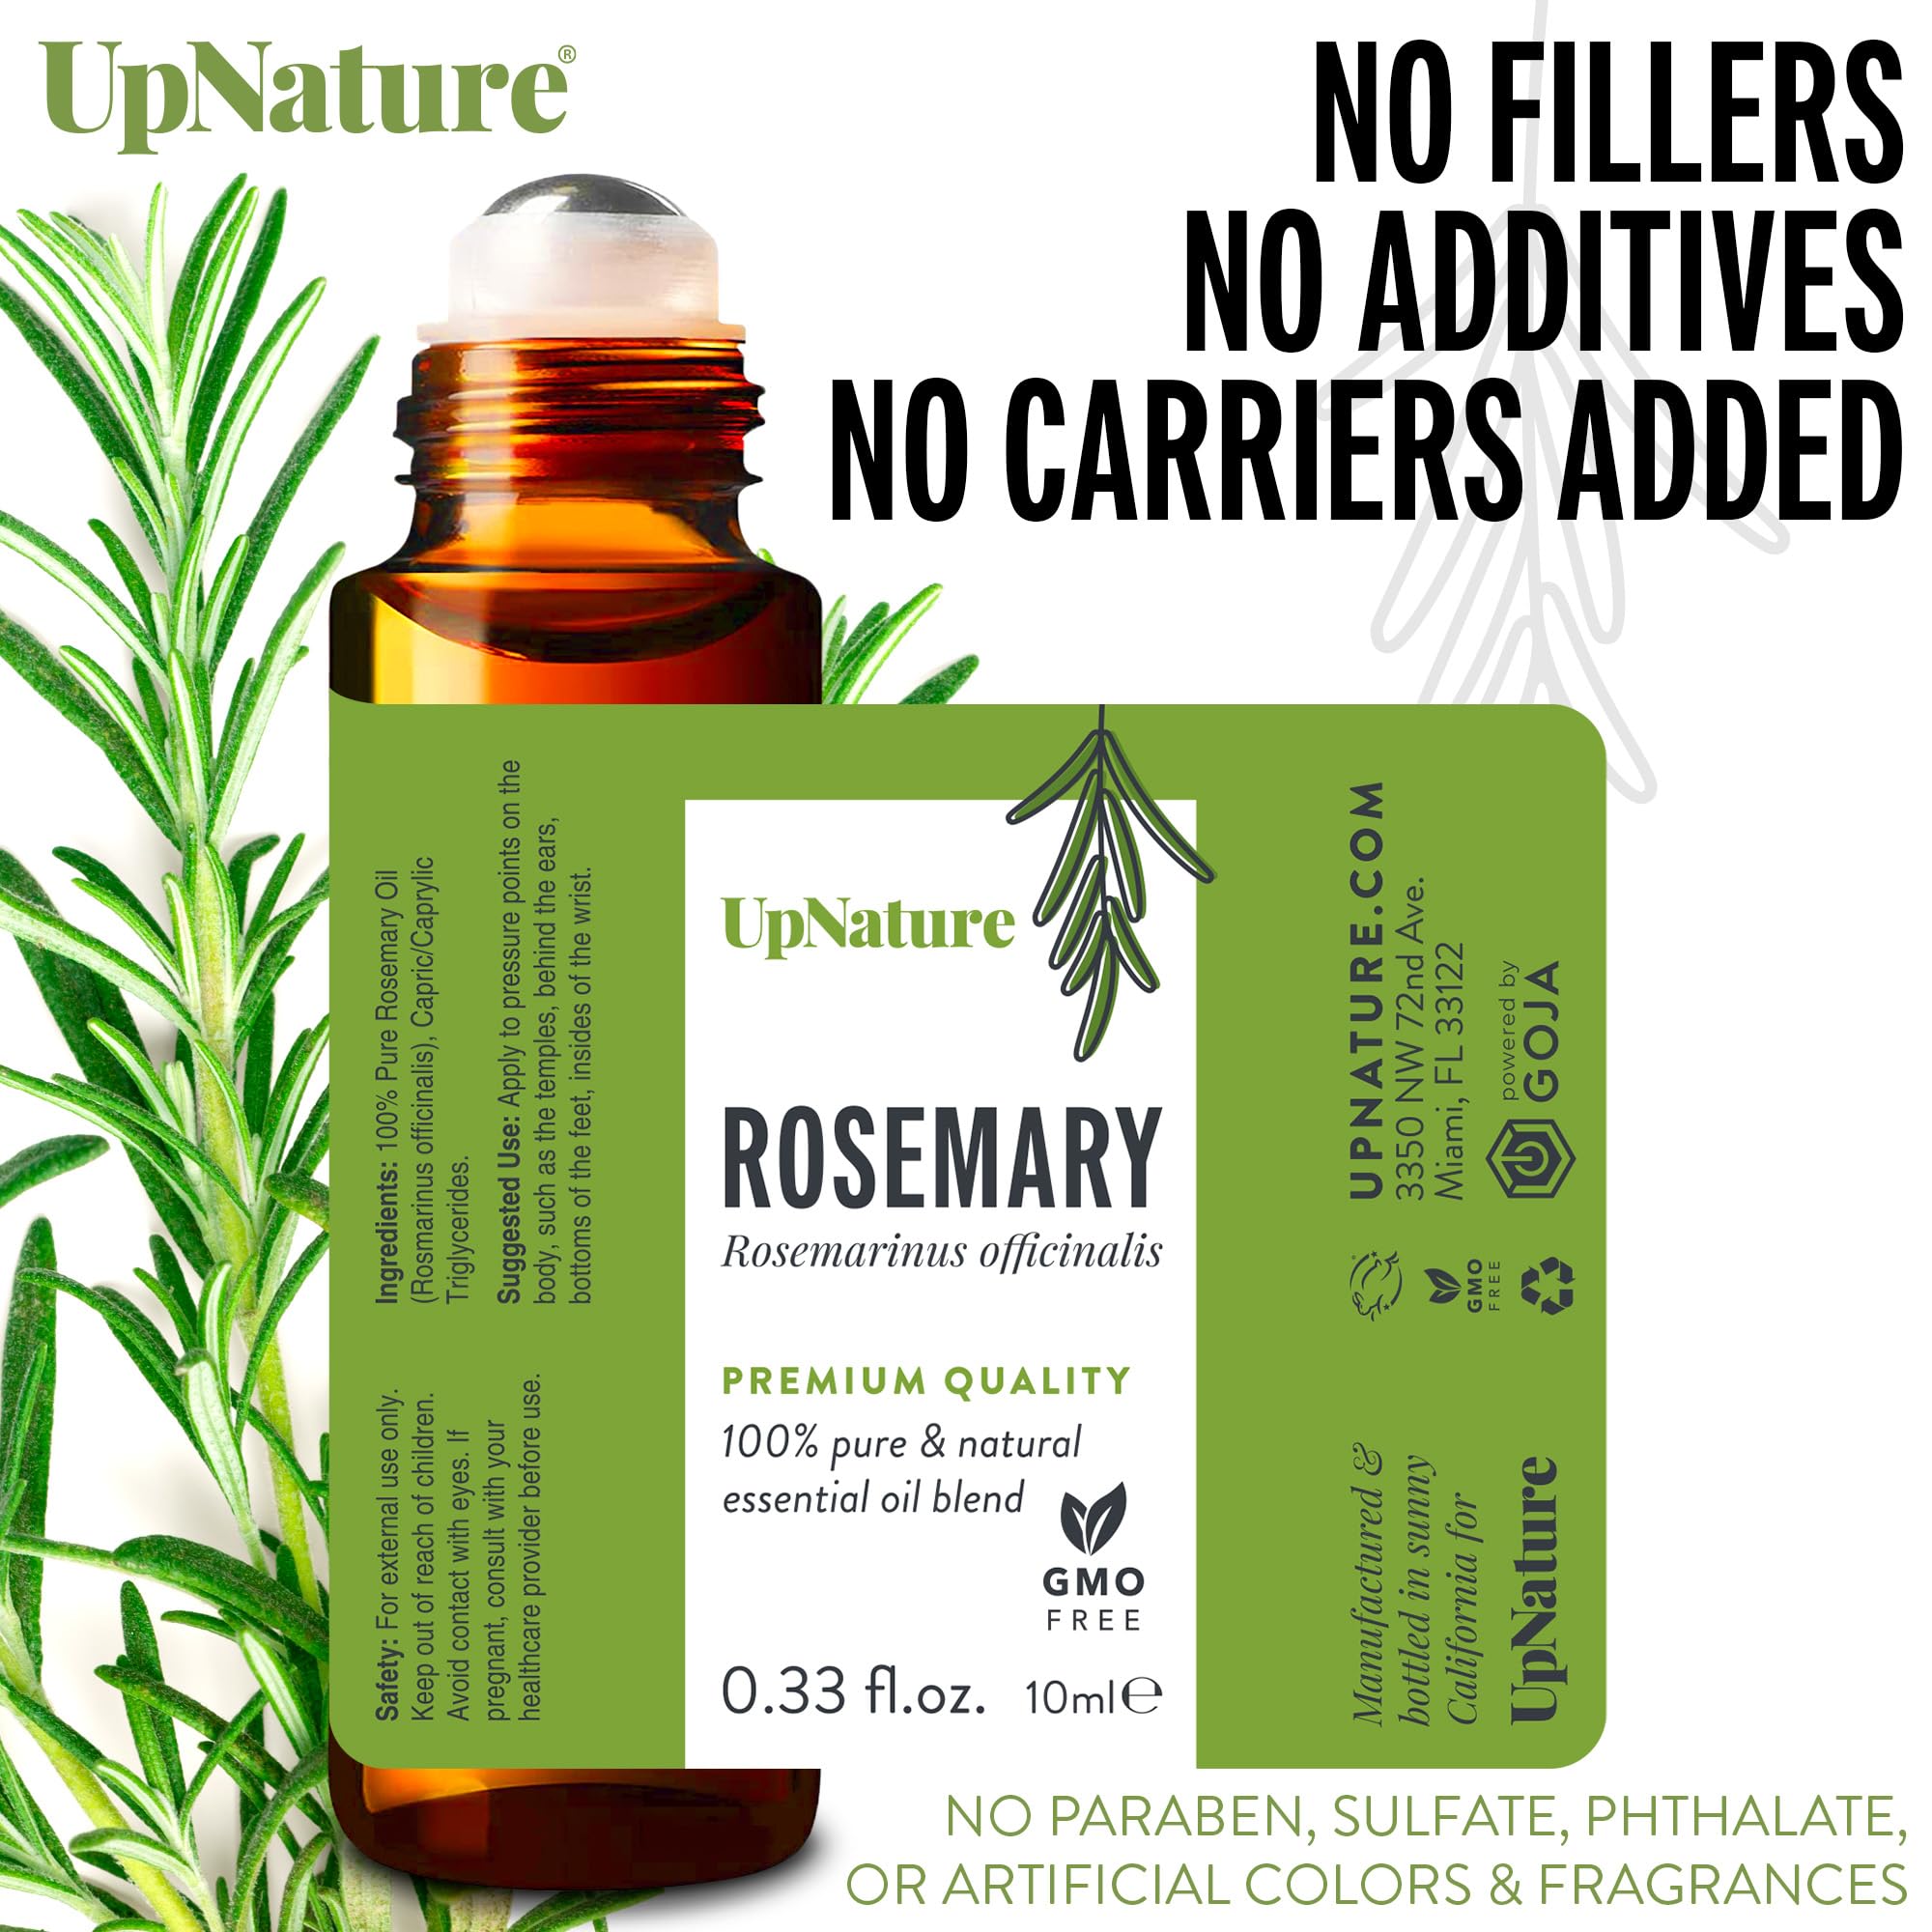 Rosemary Essential Oil Roll On   Topical Rosemary Oil for Hair Growth & Skin - Therapeutic Grade Aromatherapy Oils - Improve Focus and Memory, Relieves Pain & Improves Circulation - Pre-Diluted